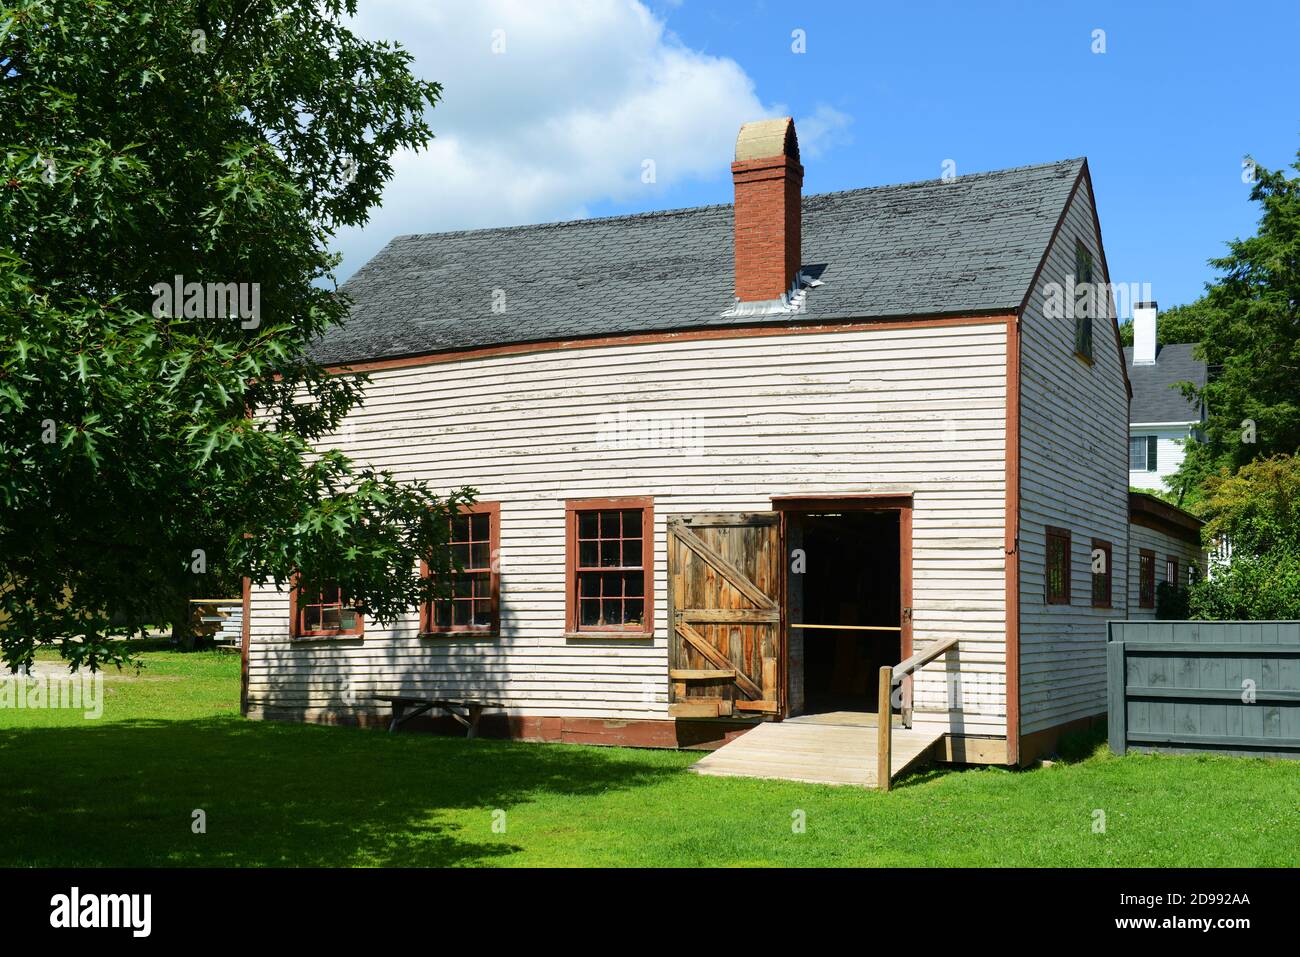 Stable was built in 1890 at Strawbery Banke Museum in Portsmouth, New Hampshire, USA. Stock Photo